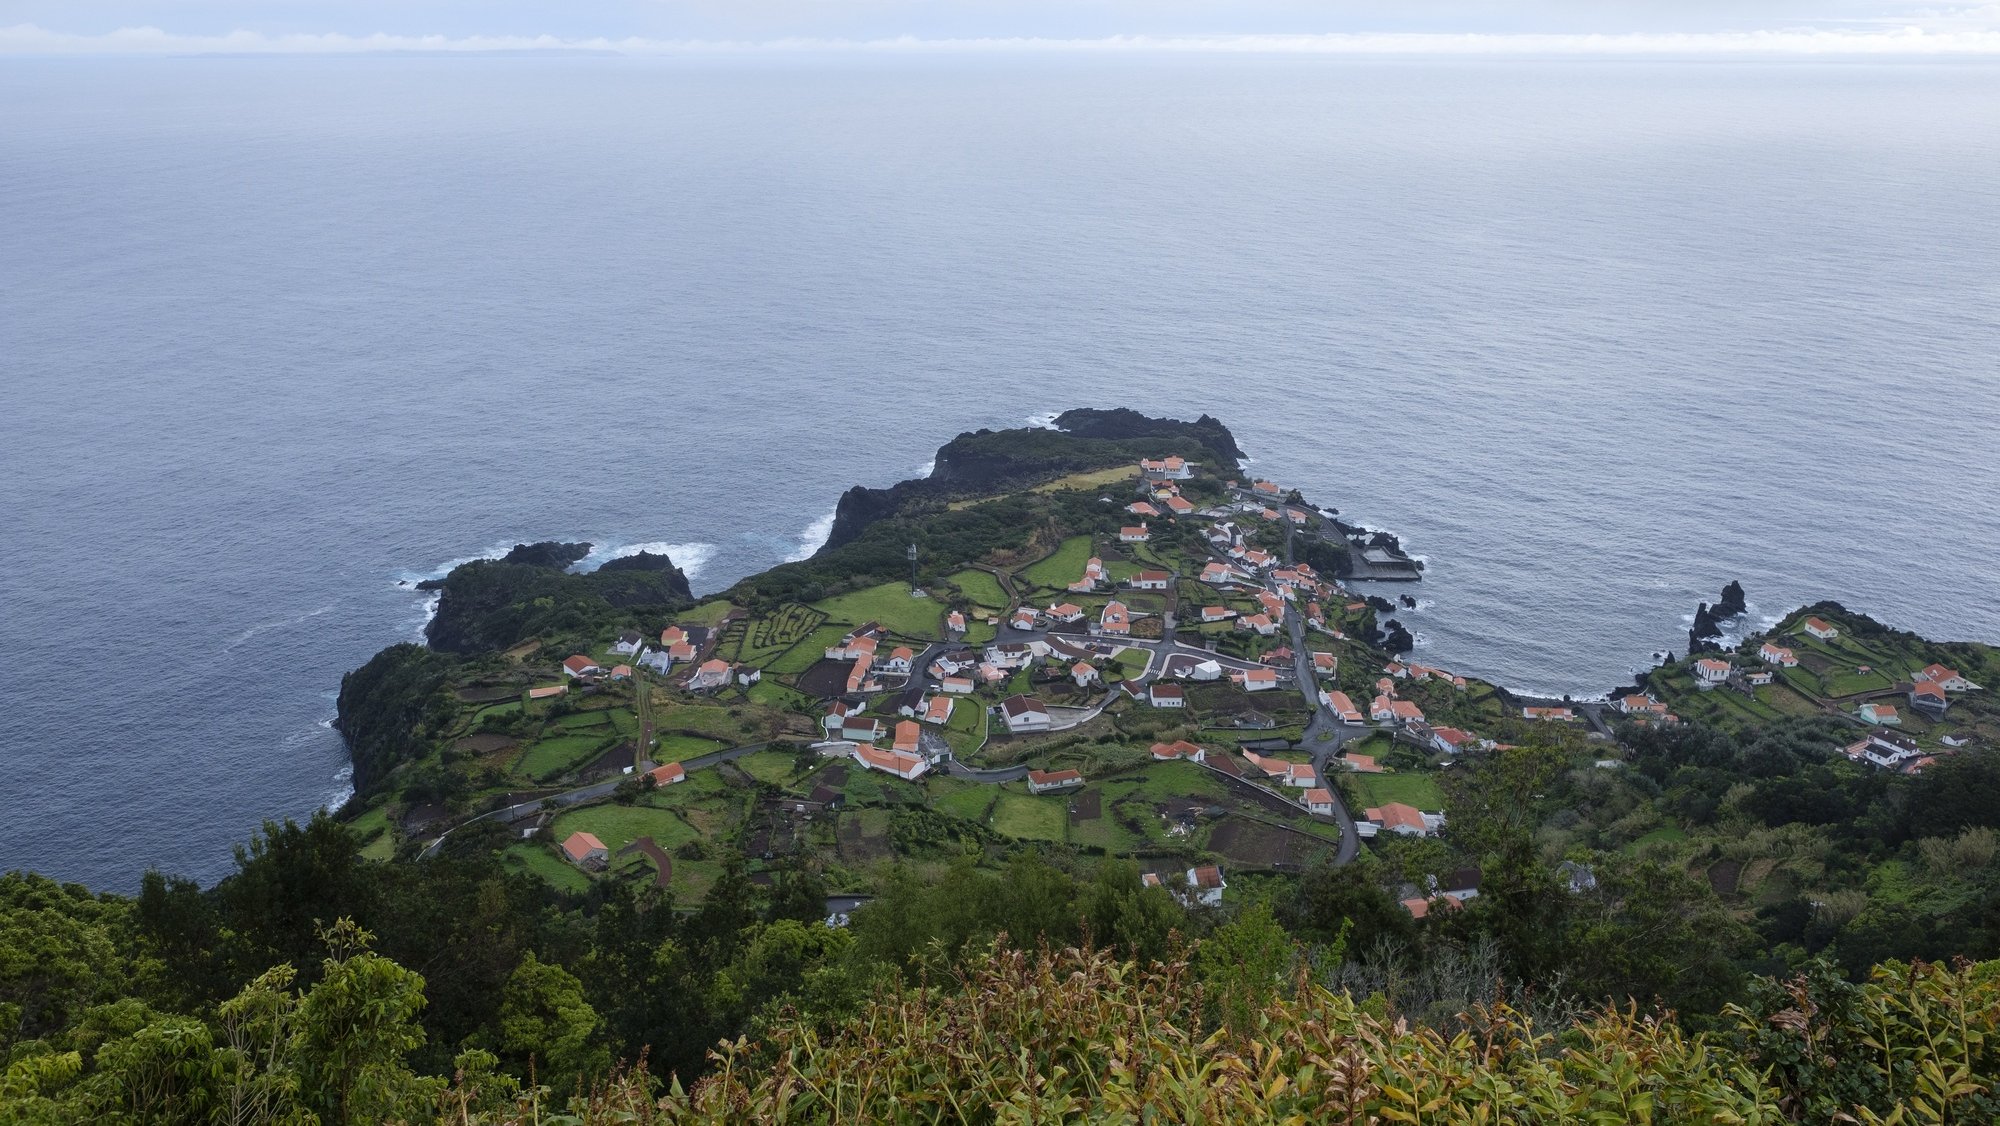 epa09851608 A view on Faja dos Cubres at Concelho de Velas, Sao Jorge island, Azores, Portugal, 26 March 2022. The island of Sao Jorge has counted about 12,700 earthquakes since 19th March, more than double of all those recorded in the Azores archipelago since 2021.  EPA/ANTONIO ARAUJO